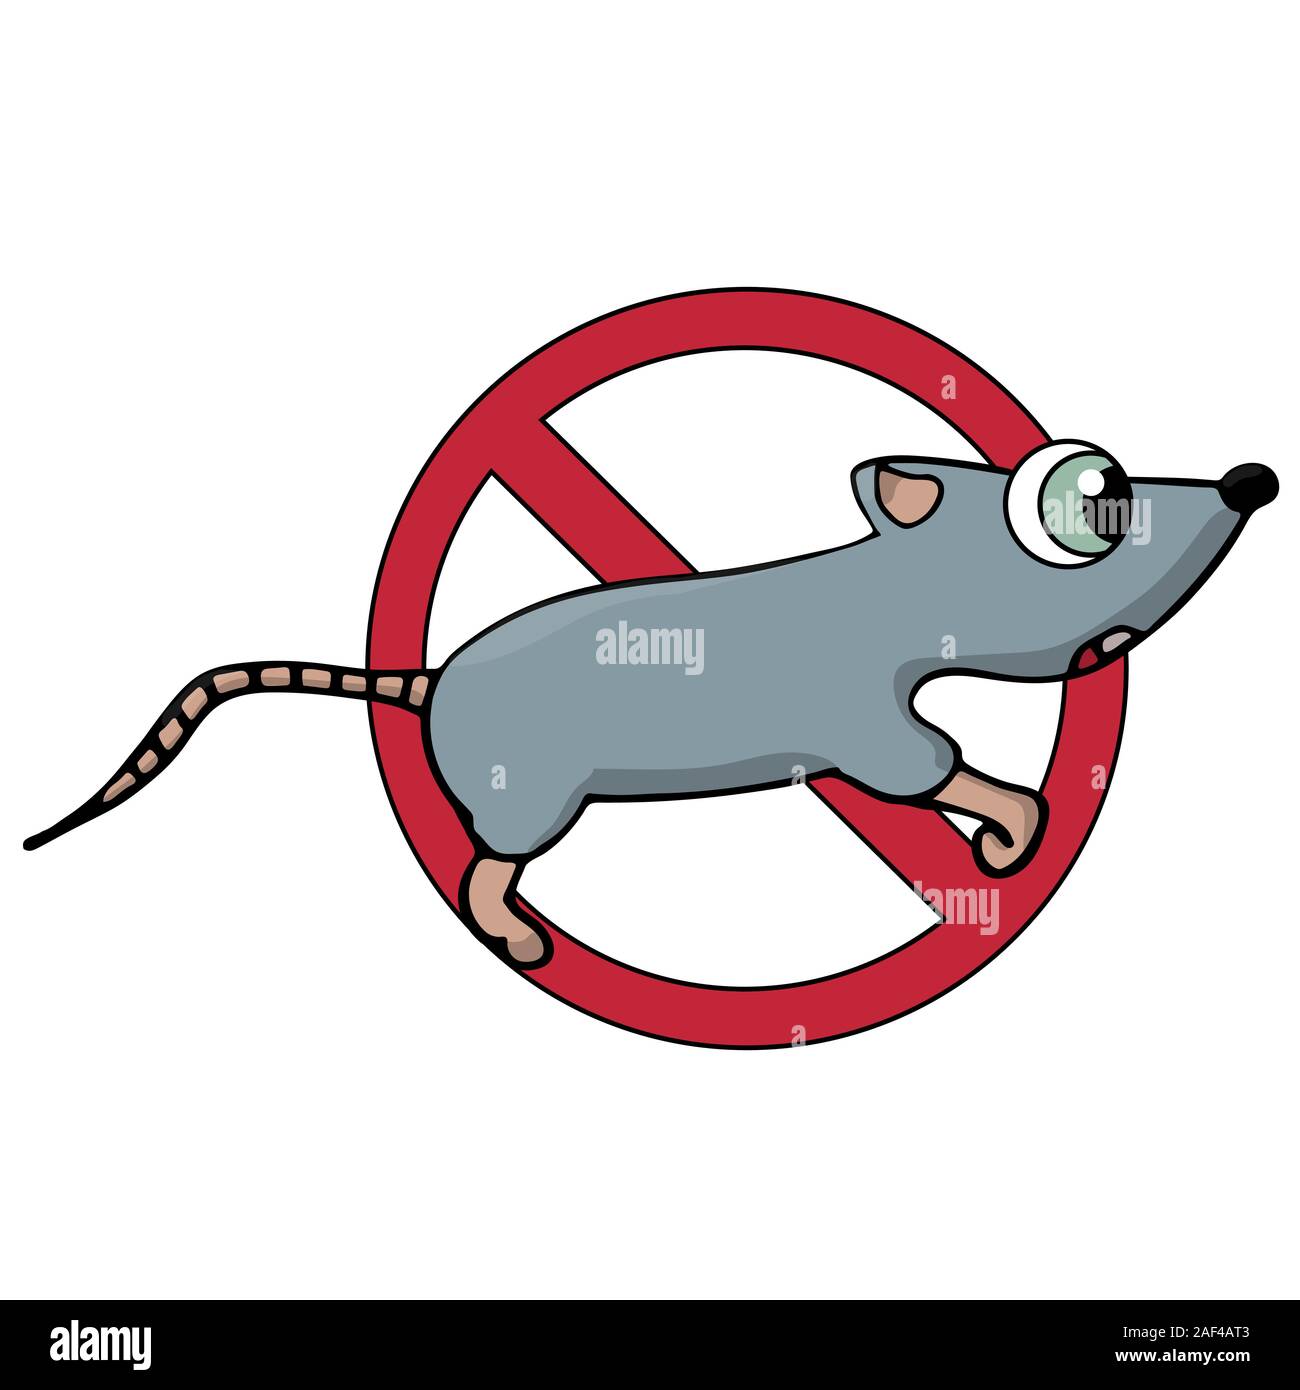 anti pests sign. rodent control. no mouse, rat. isolated stock vector illustration Stock Vector